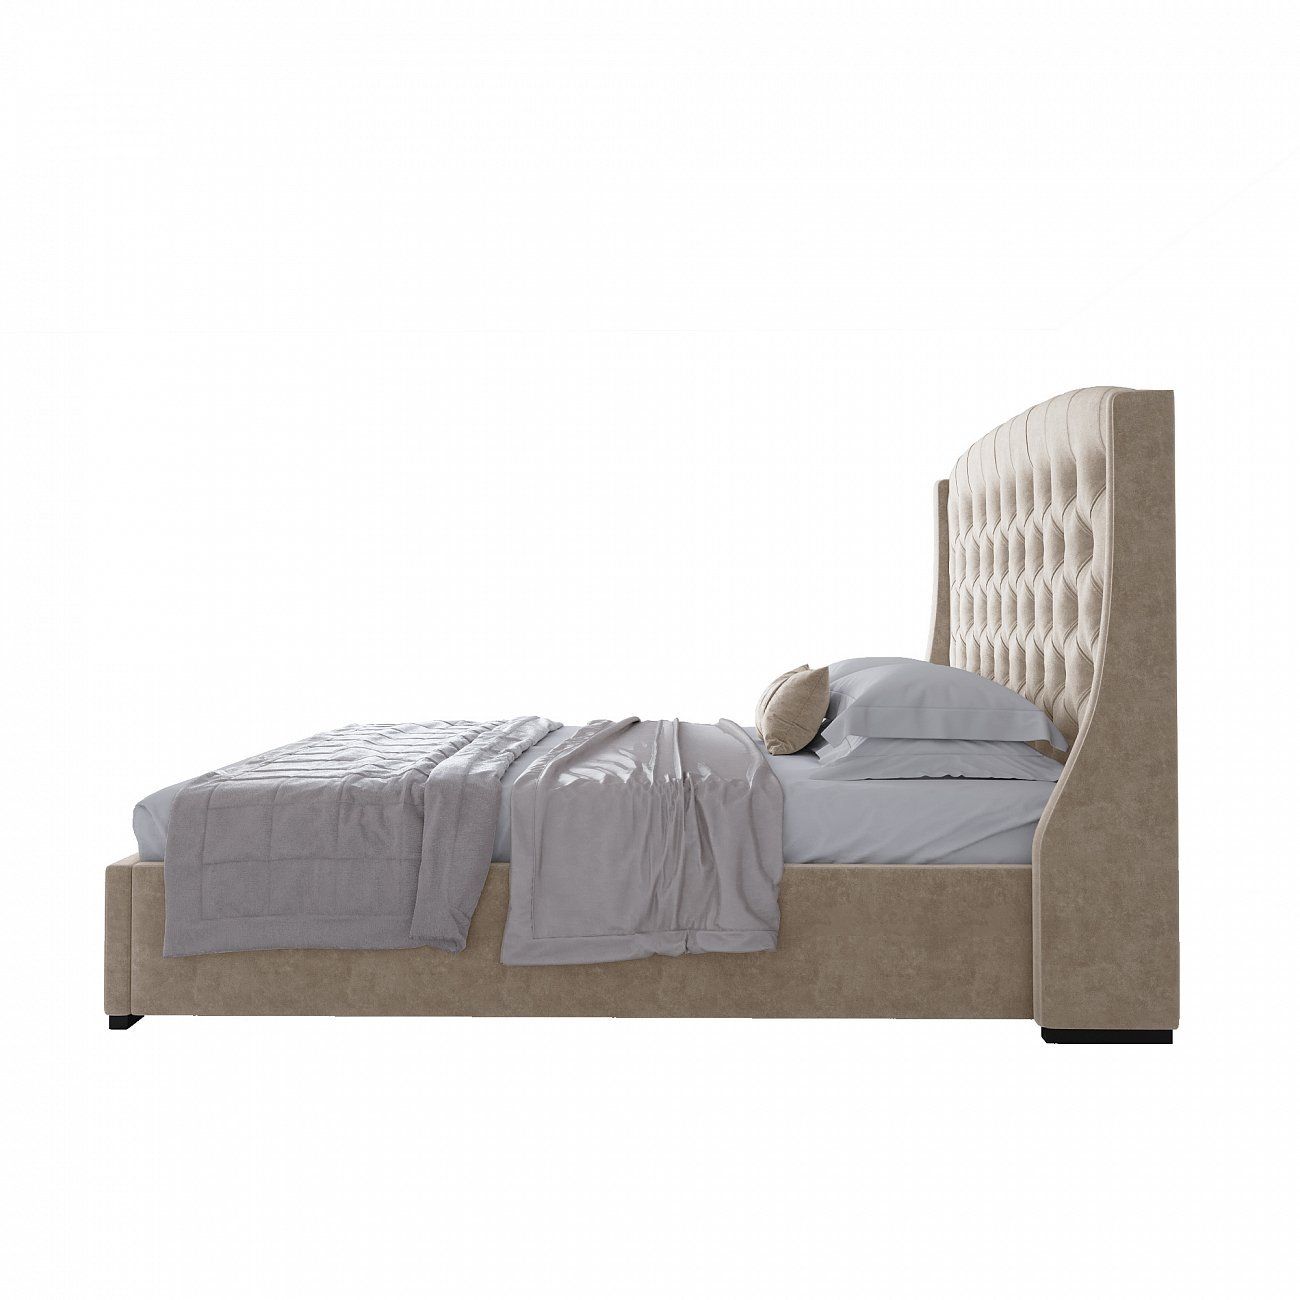 Double bed with upholstered headboard 180x200 cm light beige Hugo M R